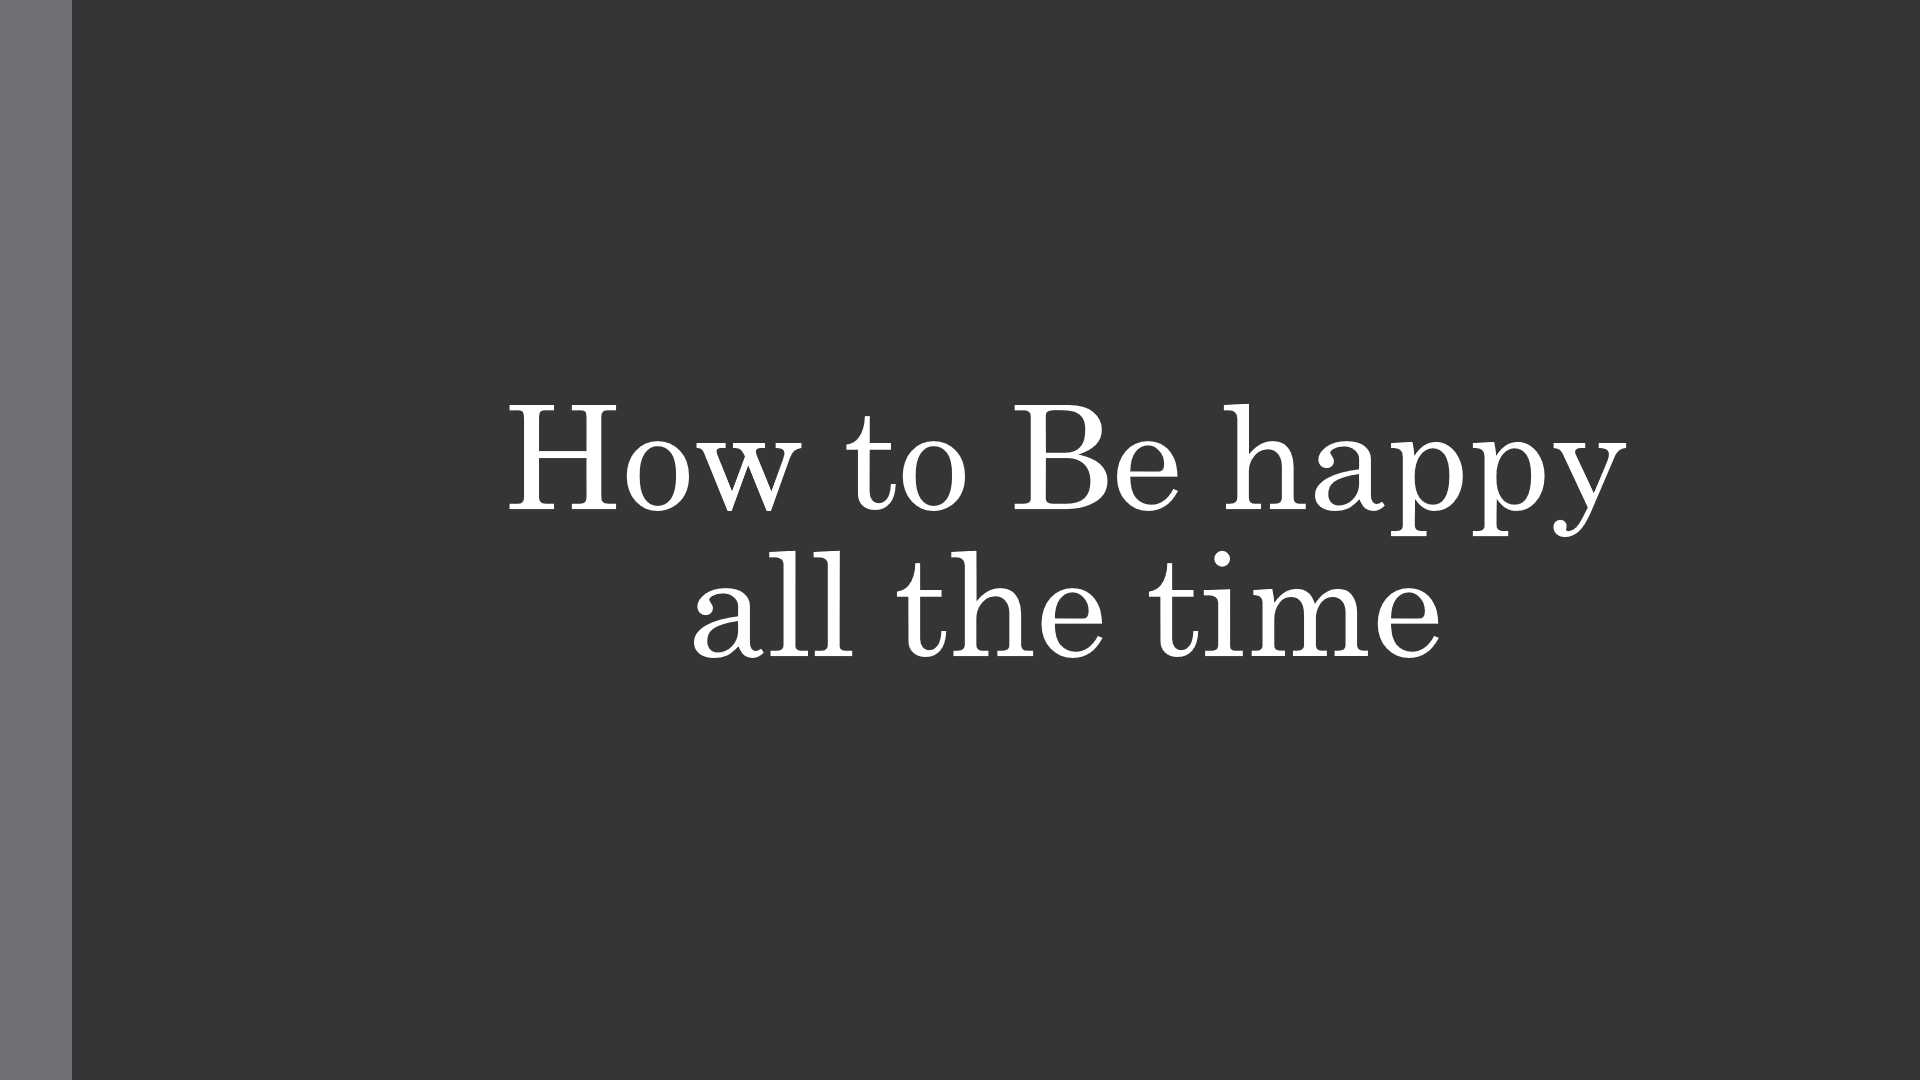 How to Be happy all the time